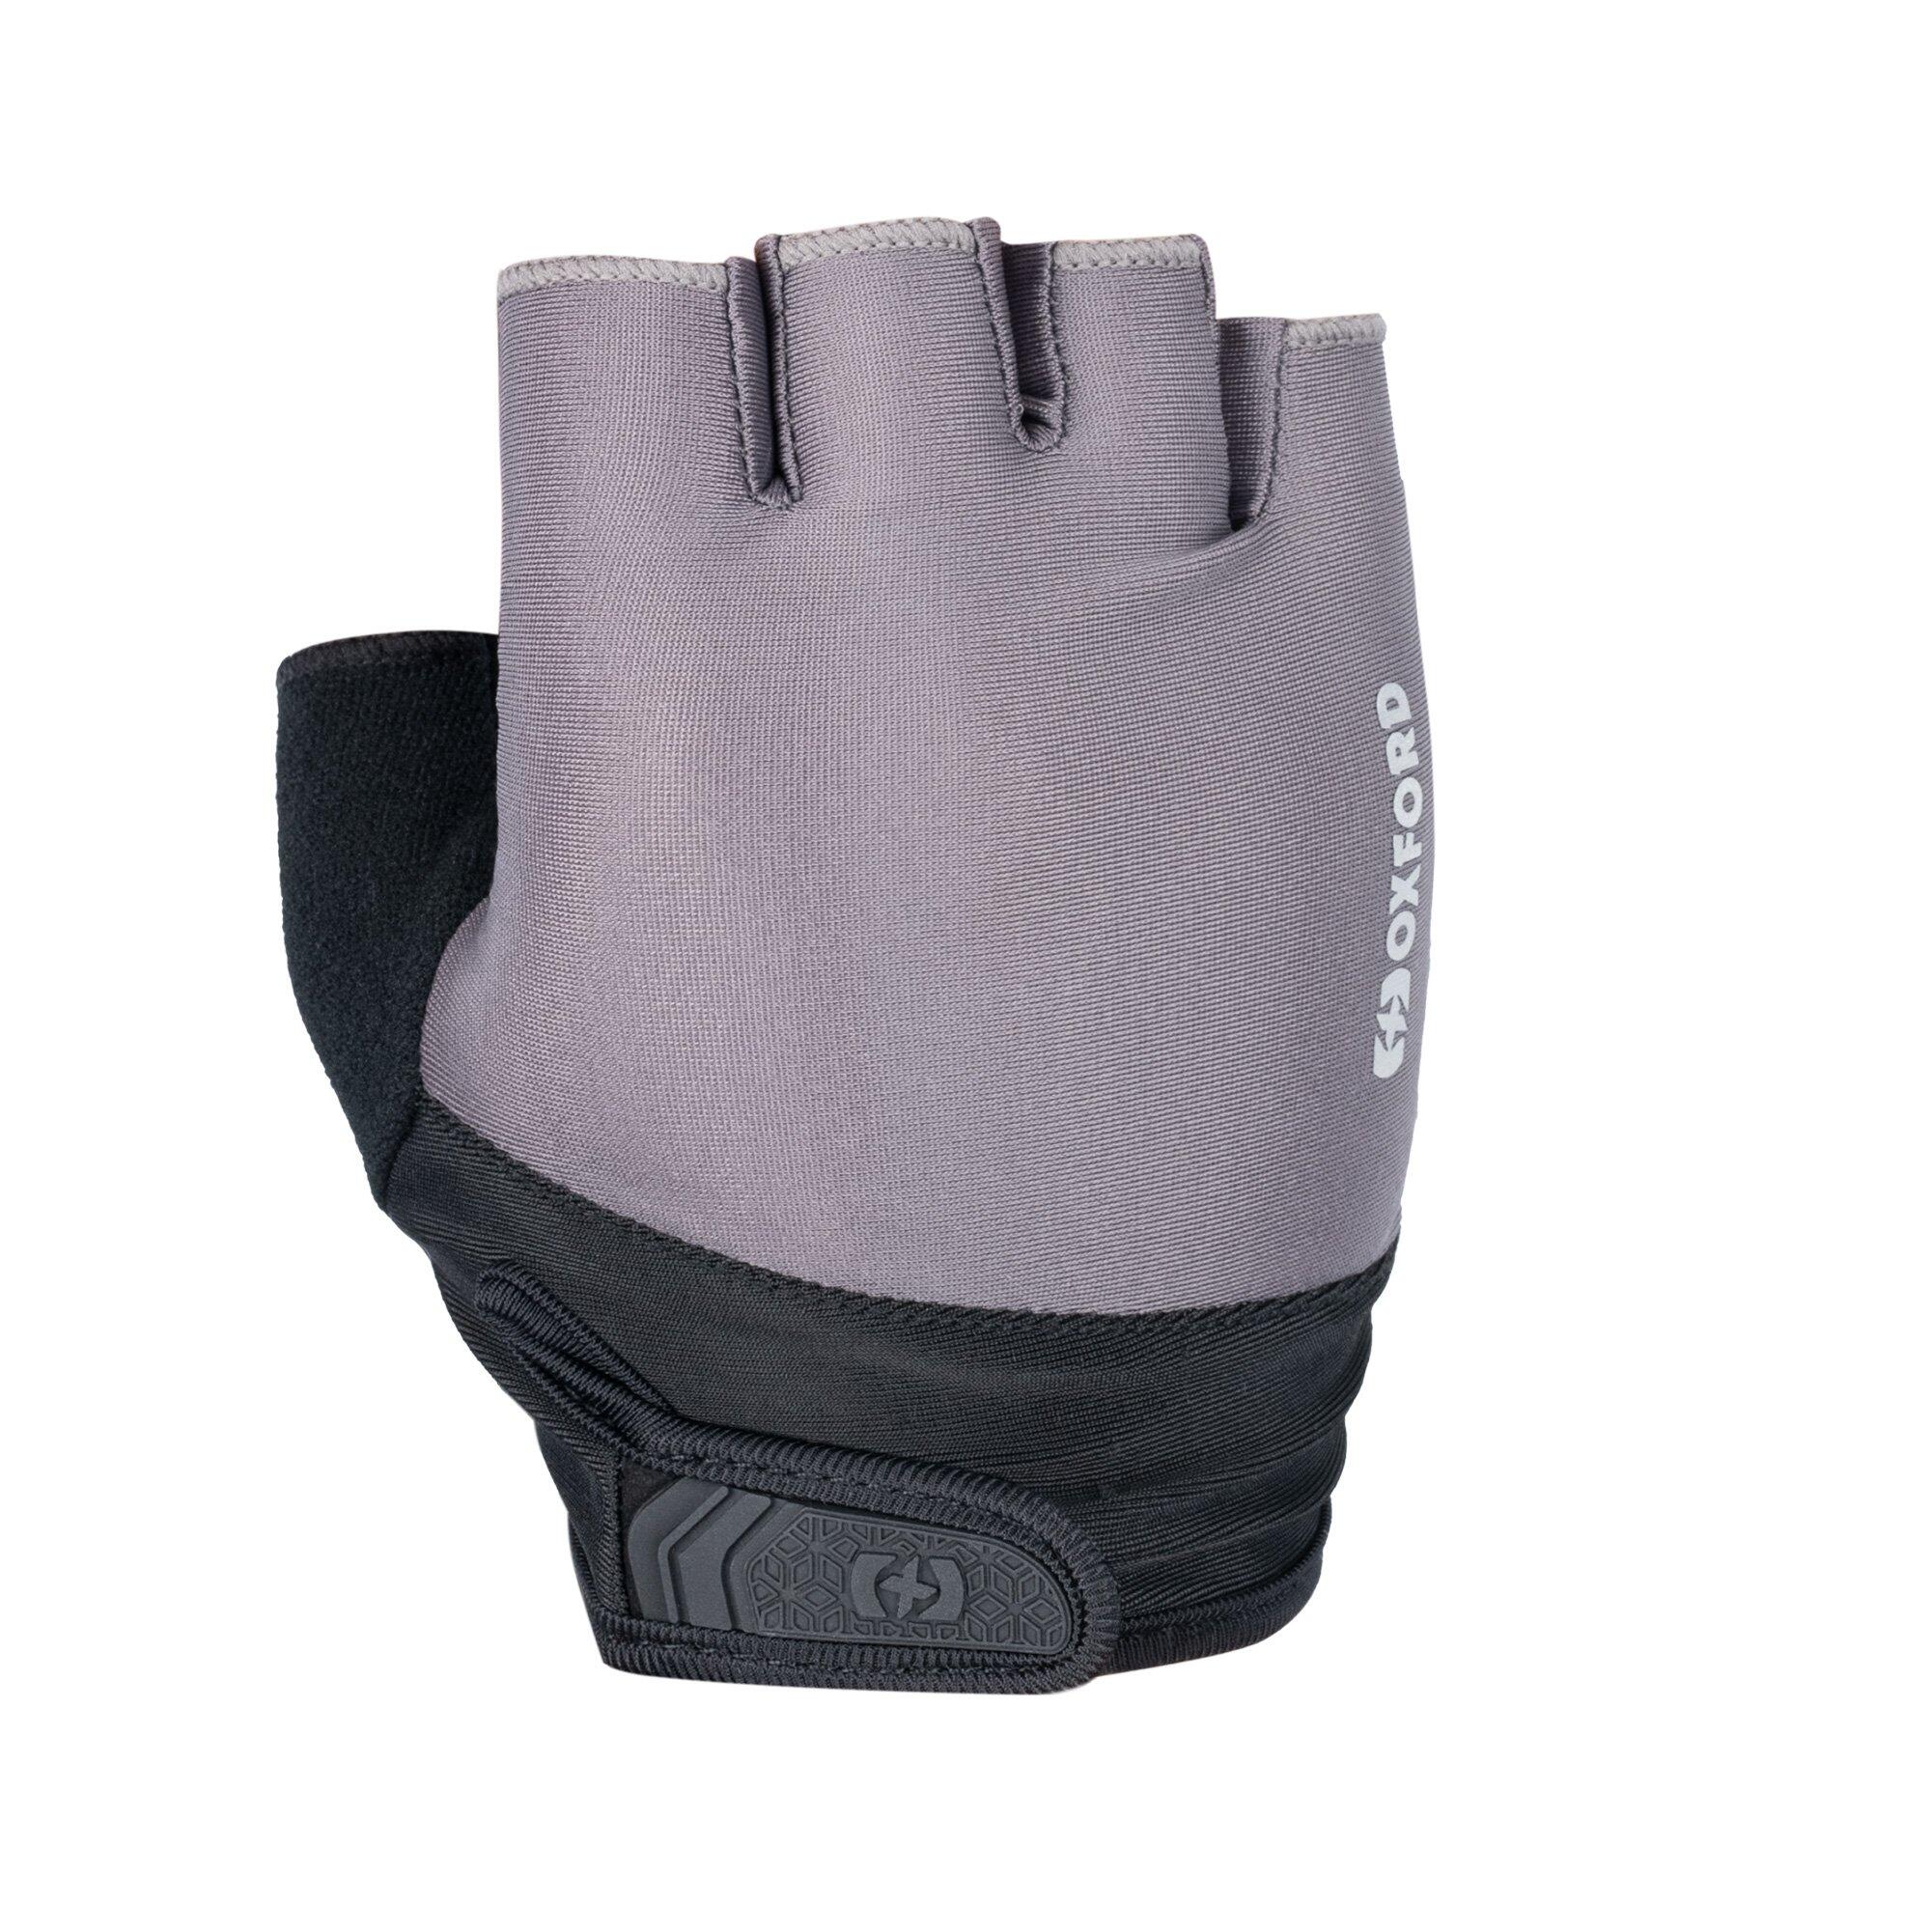 OXFORD Oxford Cadence 2.0 Mitts Grey S